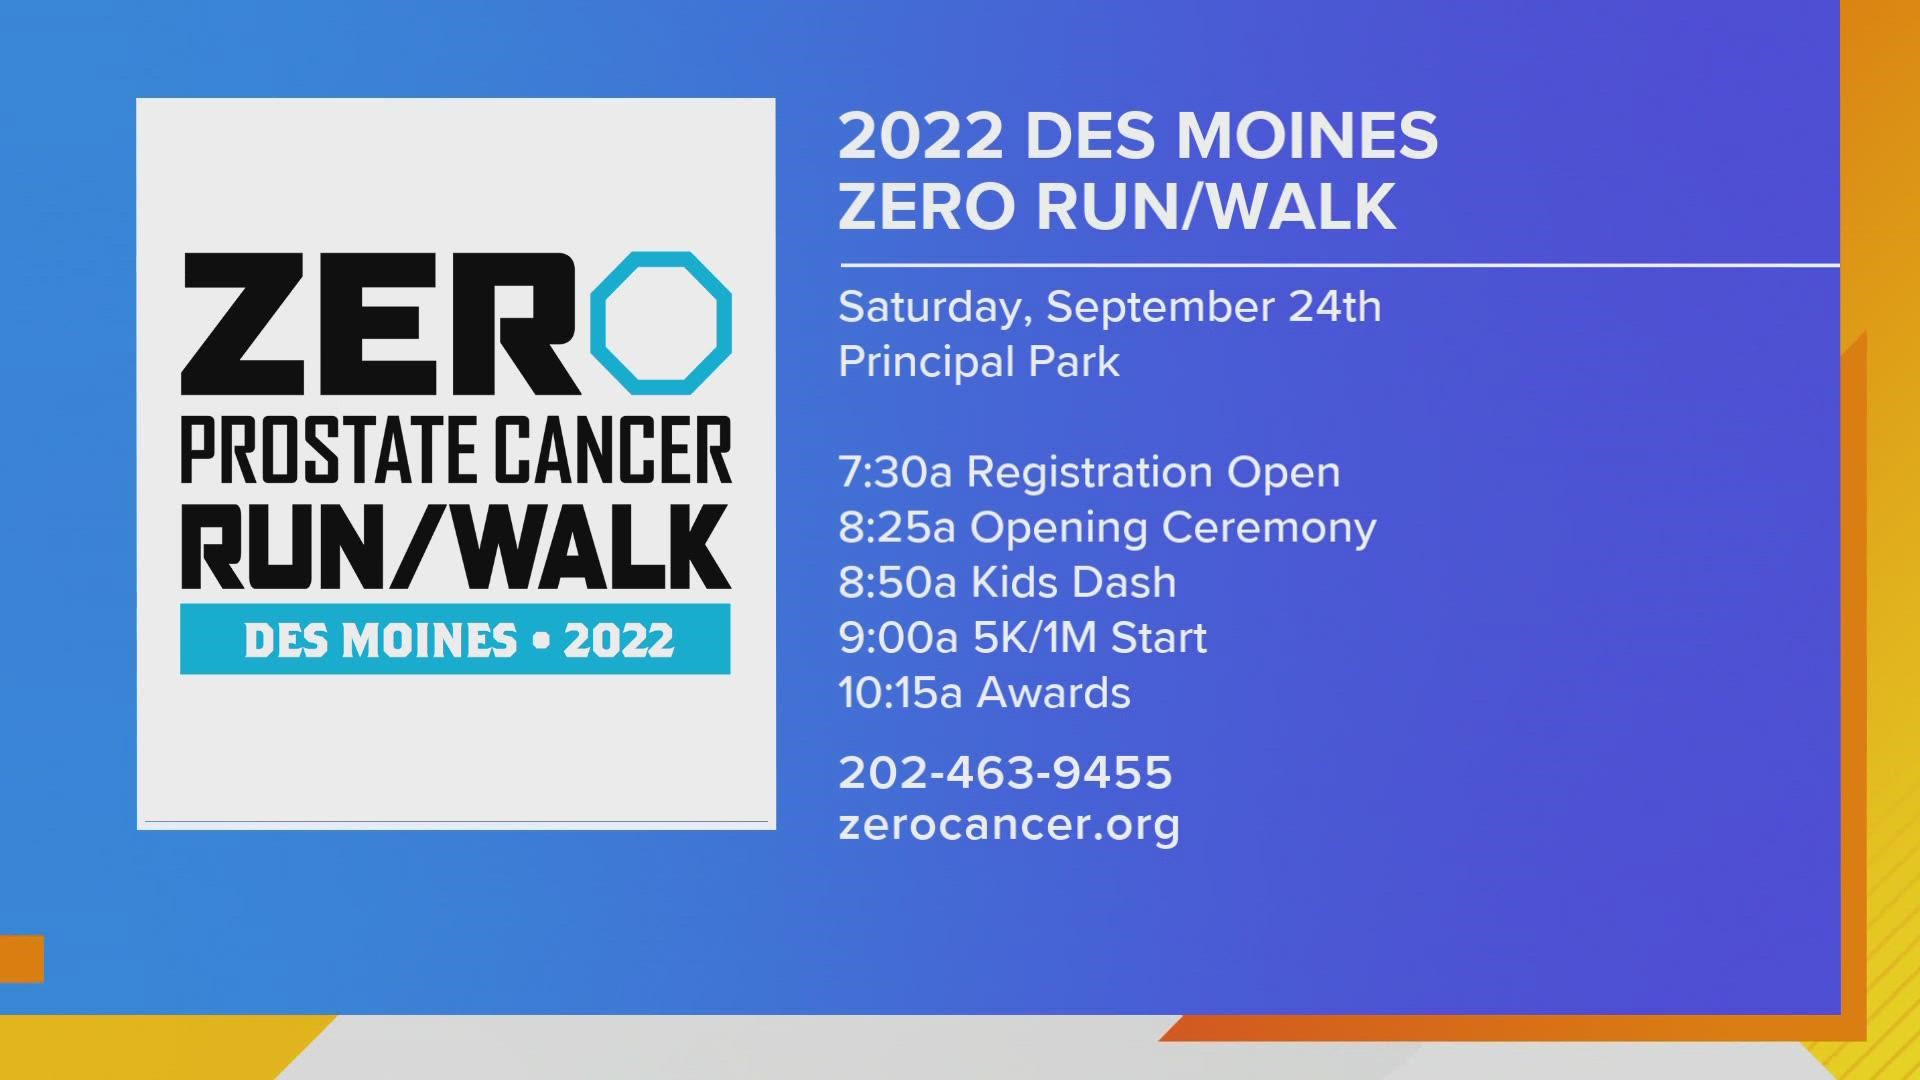 ZERO - The End of Prostate Cancer is hosting it's Annual Des Moines ZERO Run/Walk THIS SATURDAY (9/24/22) at Principal Park in Des Moines. INFO at ZeroCancer.org